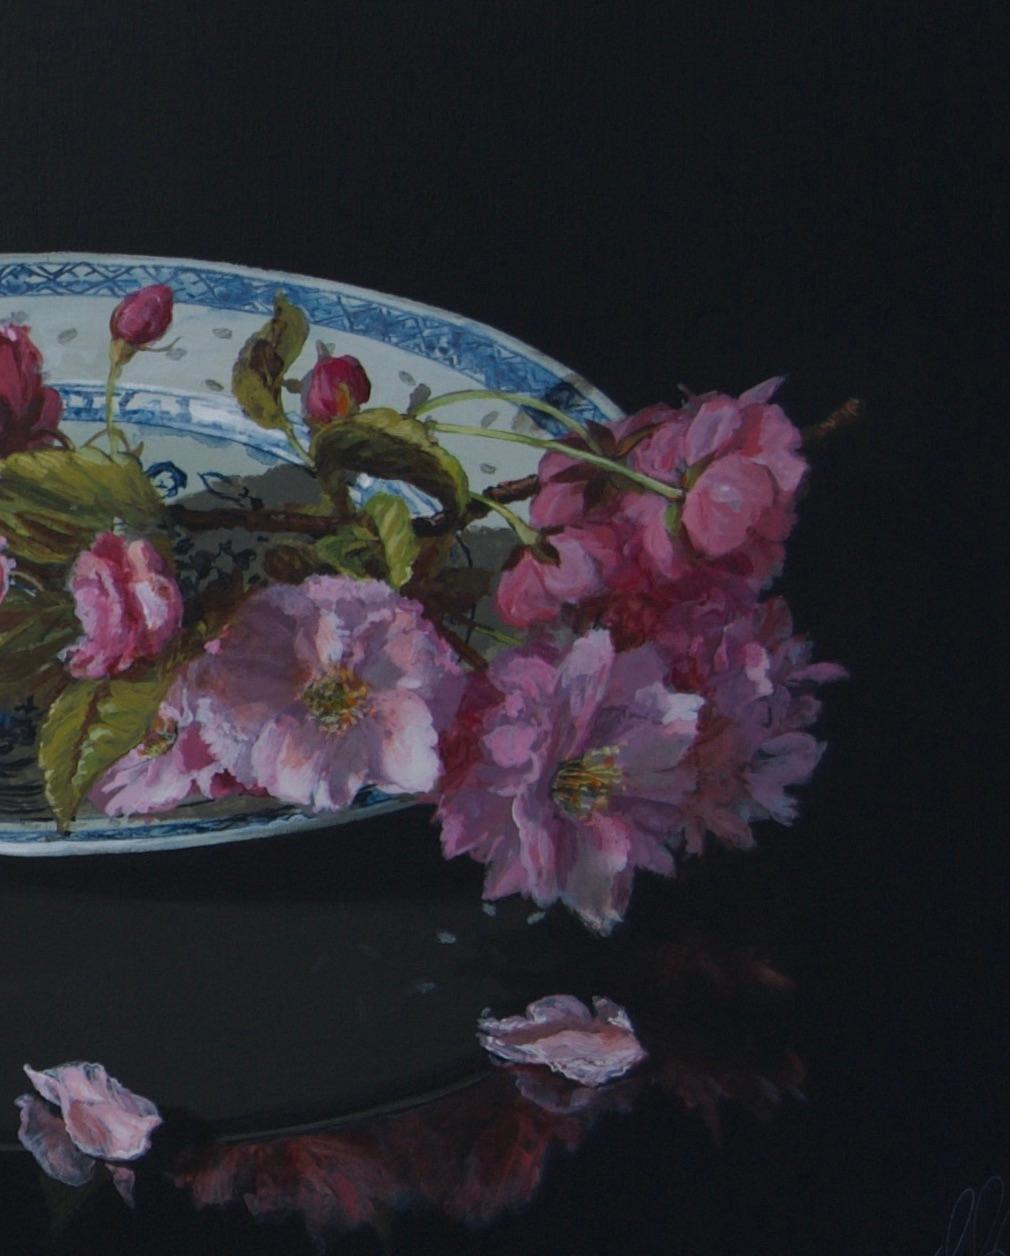 When you look at this painting ''Japanese Blossom on Porcelain'' by Dutch artist Sasja Wagenaar (1959) from a distance you see a perfectly painted image, but up close a generous paint streak is visible. She has a unique way of applying shadow and